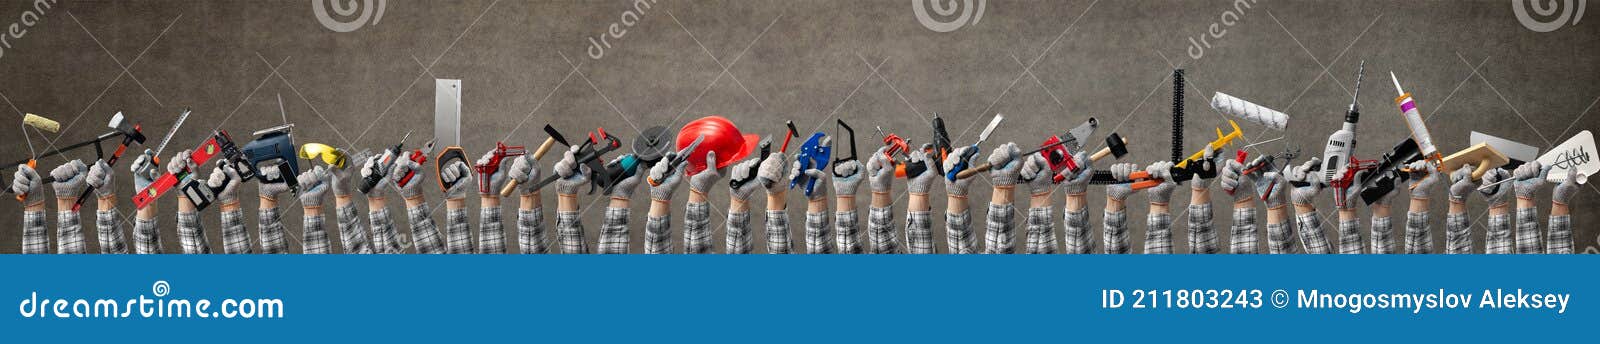 group of hands holds a construction tools for woodworking, construction and repair